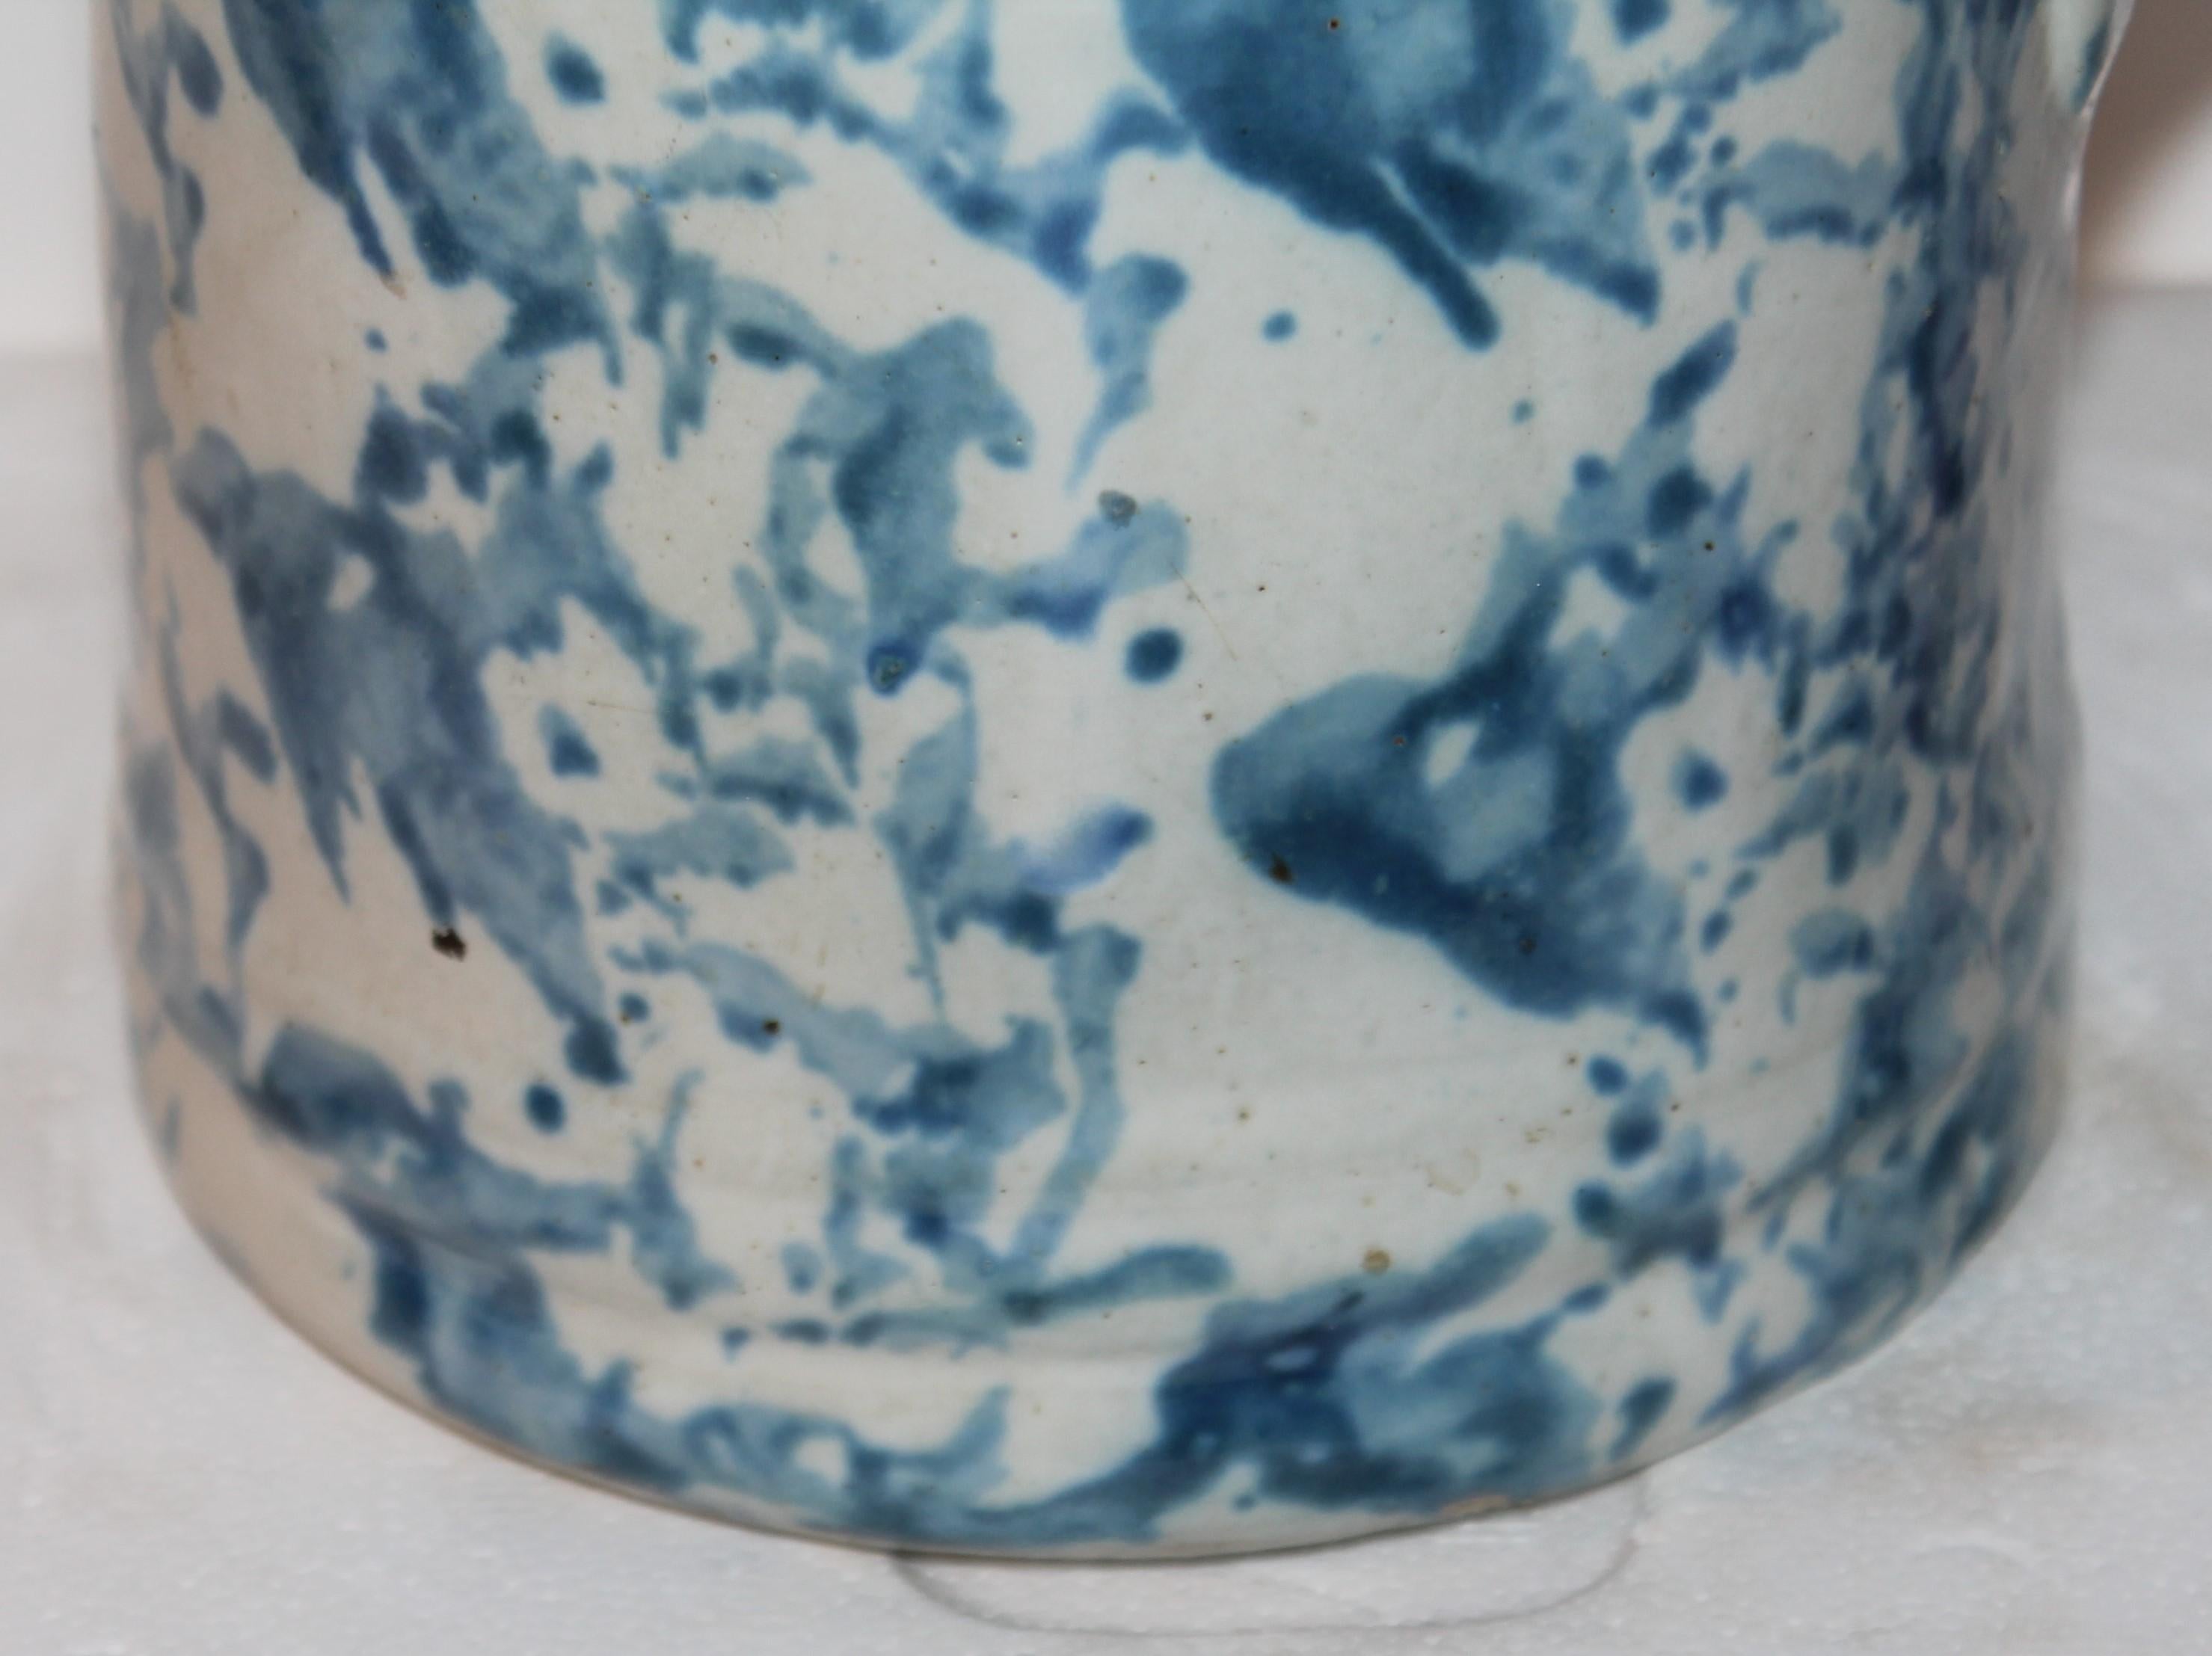 19thc Sponge ware pitcher with blue and cream design glazed for protection and preservation of paint. Great condition blue sky like design.